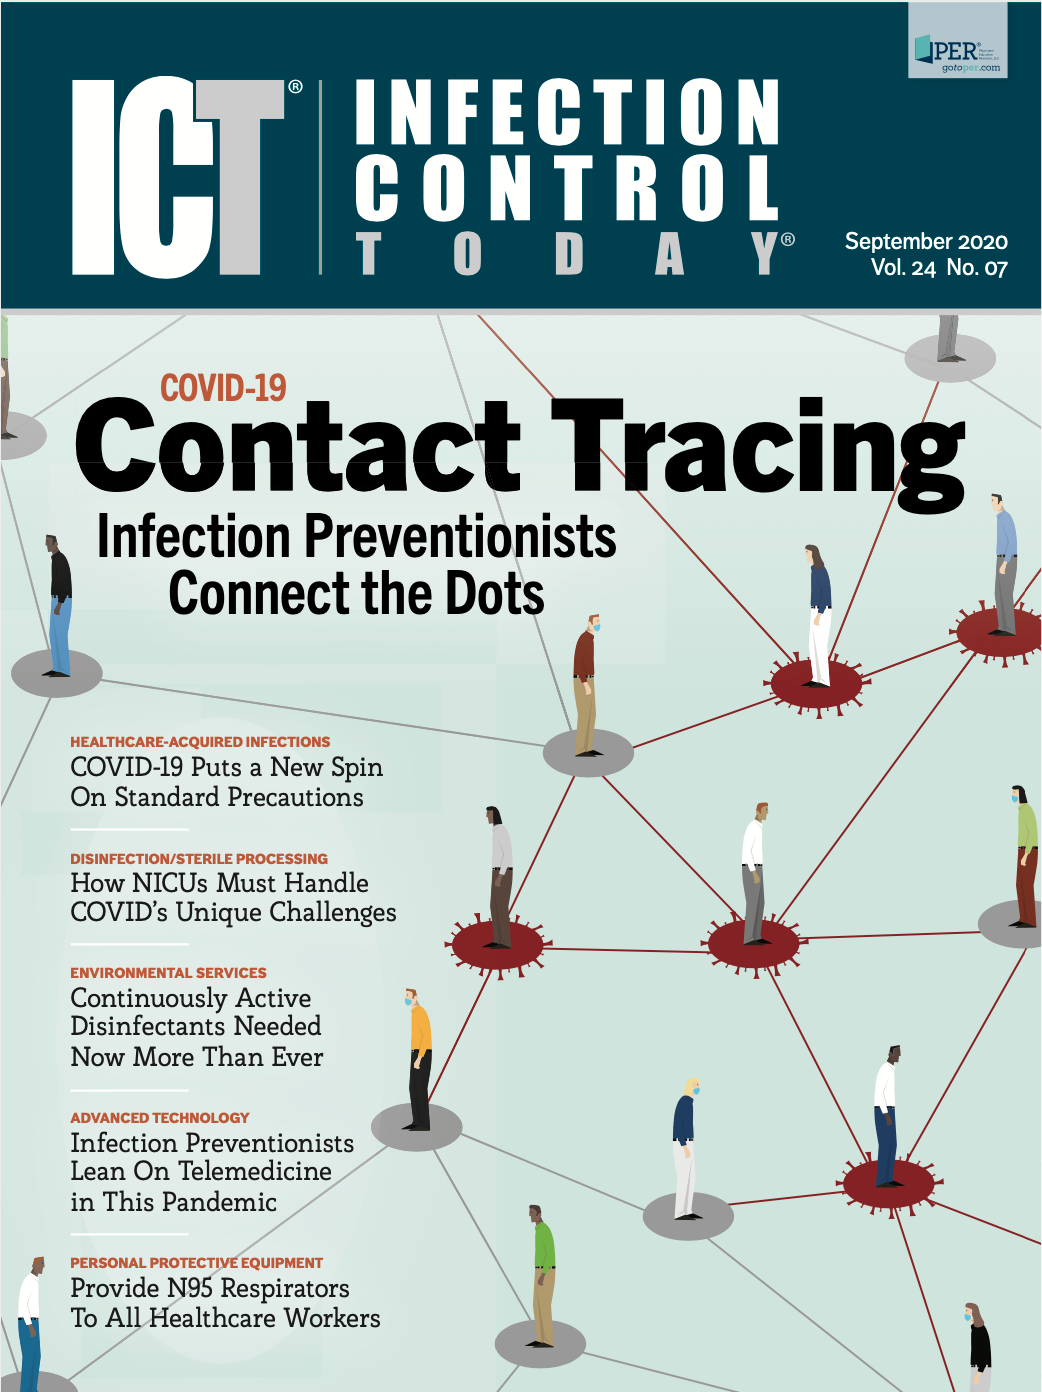 Infection Control Today, September 2020 (Vol. 24 No. 06)